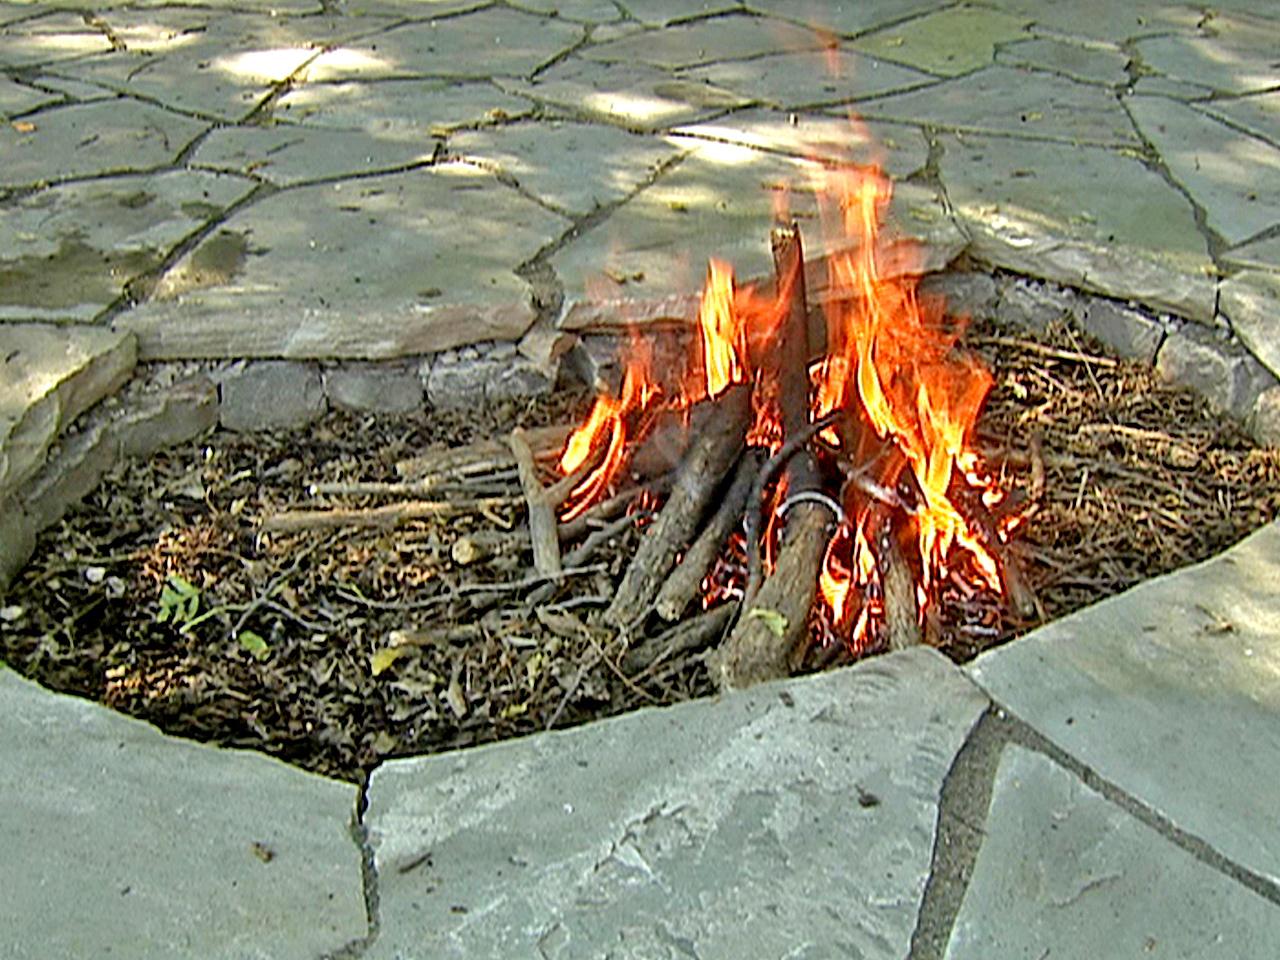 Outdoor Fire Pits And Pit Safety, Are Propane Fire Pits Legal